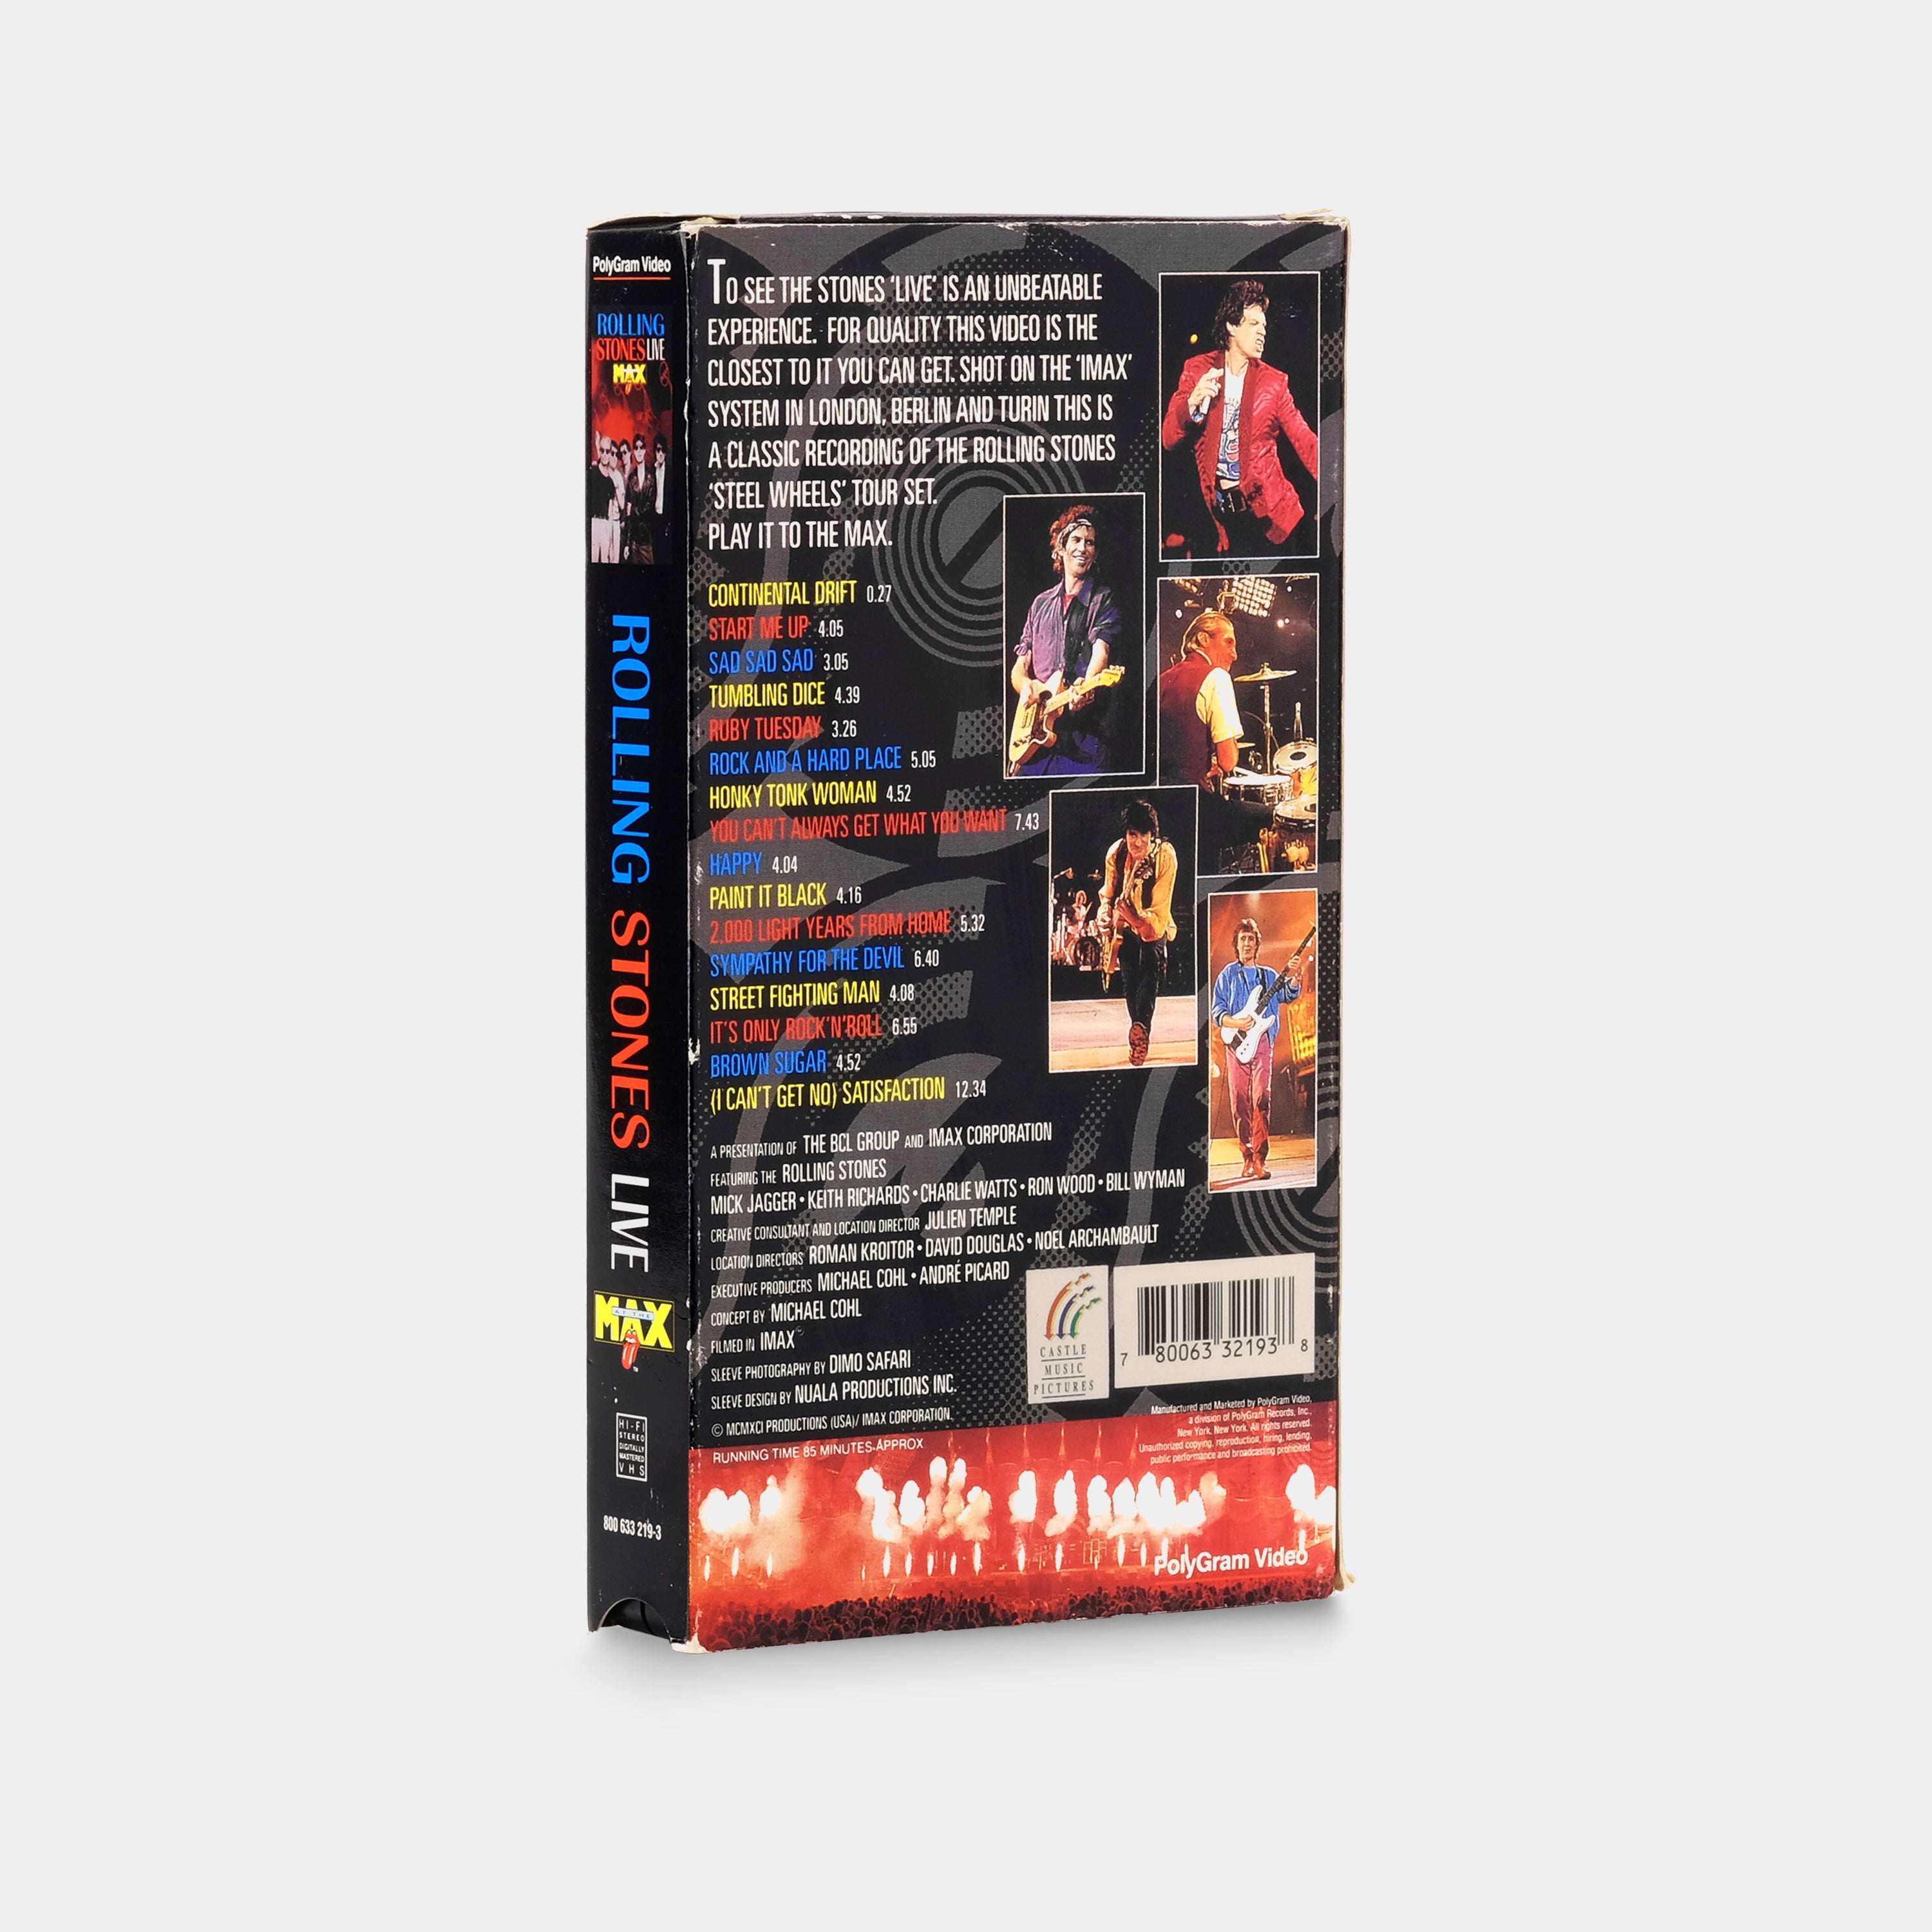 Rolling Stones Live At The Max VHS Tape